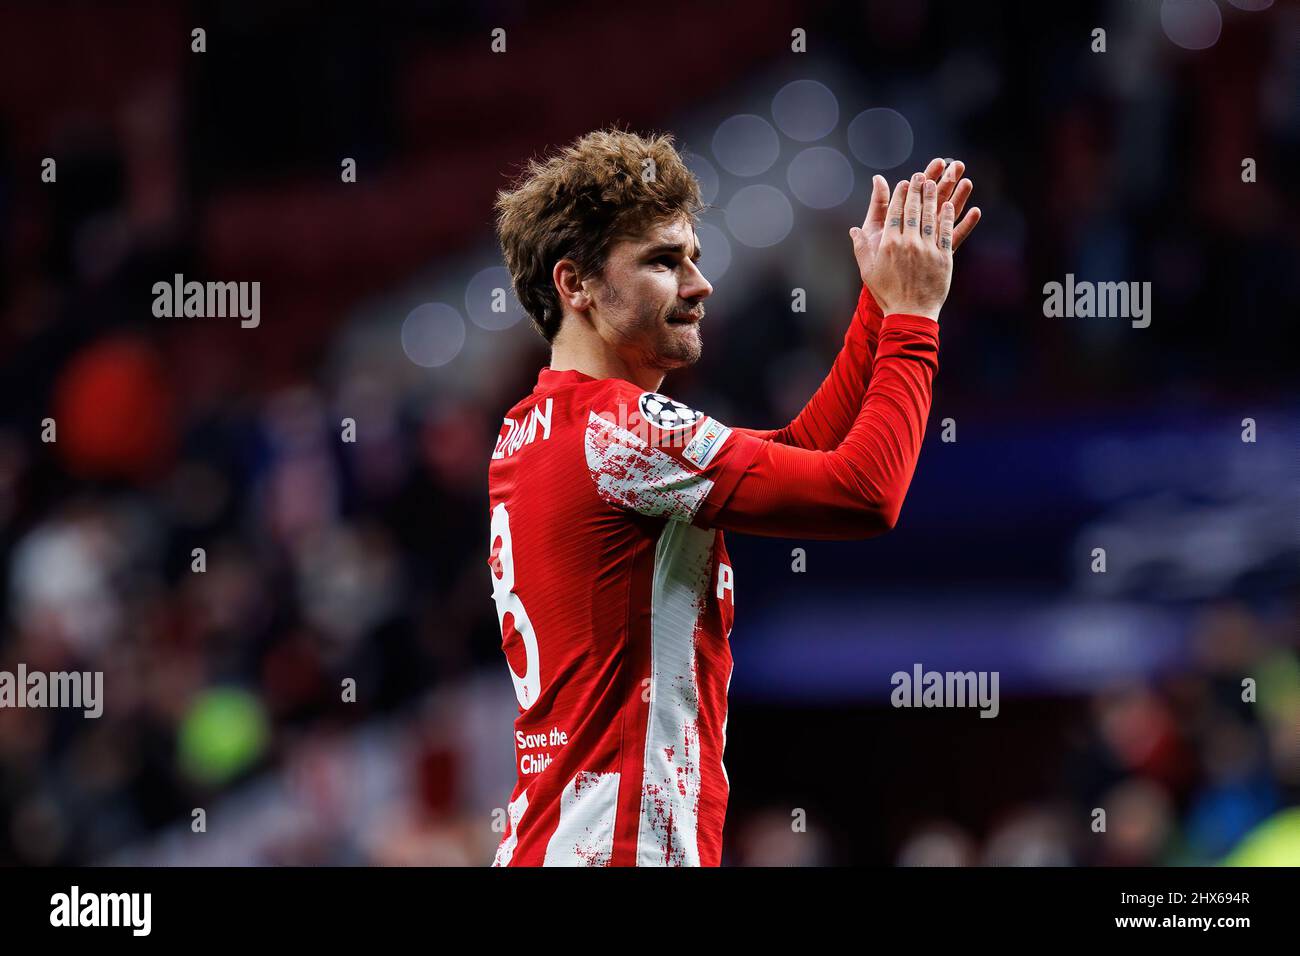 MADRID - FEB 23: Griezmann salutes the supporters at the Champions League match between Club Atletico de Madrid and Manchester United at the Metropoli Stock Photo